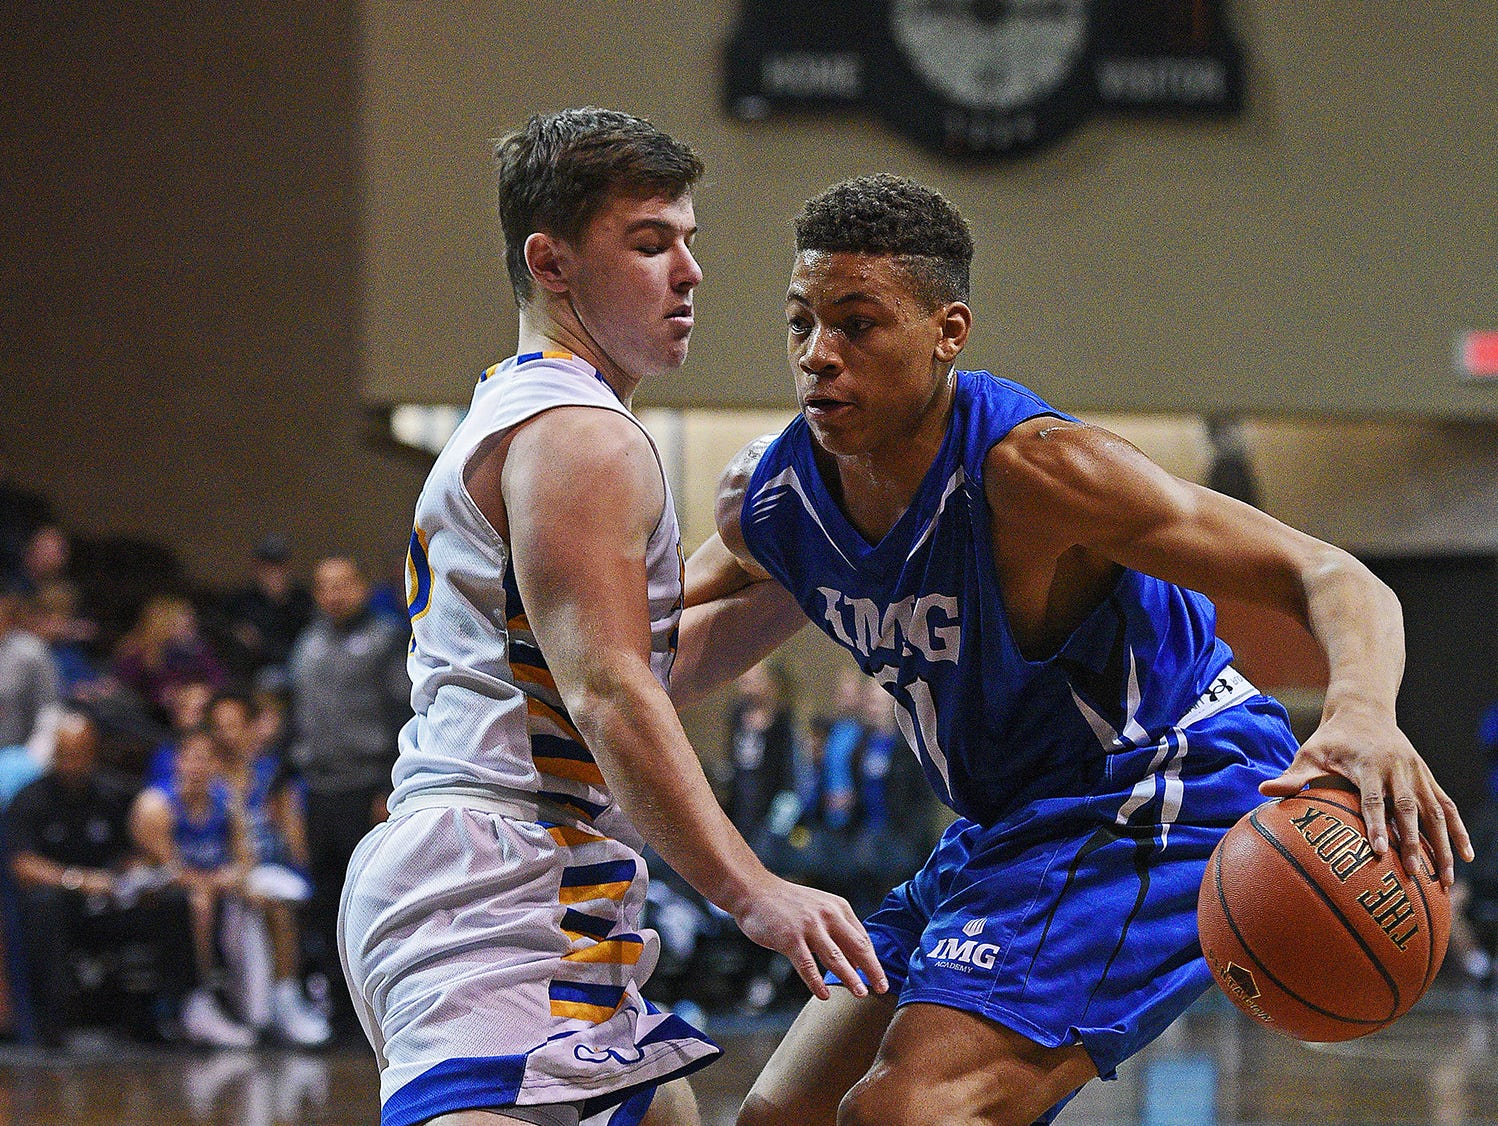 IMG Academy's Keyontae Johnson (11) tries to get past O'Gorman's Riley Katen (10) during the Gary Munsen Tournament Championship game Friday, Dec. 30, 2016, at the Sanford Pentagon in Sioux Falls.